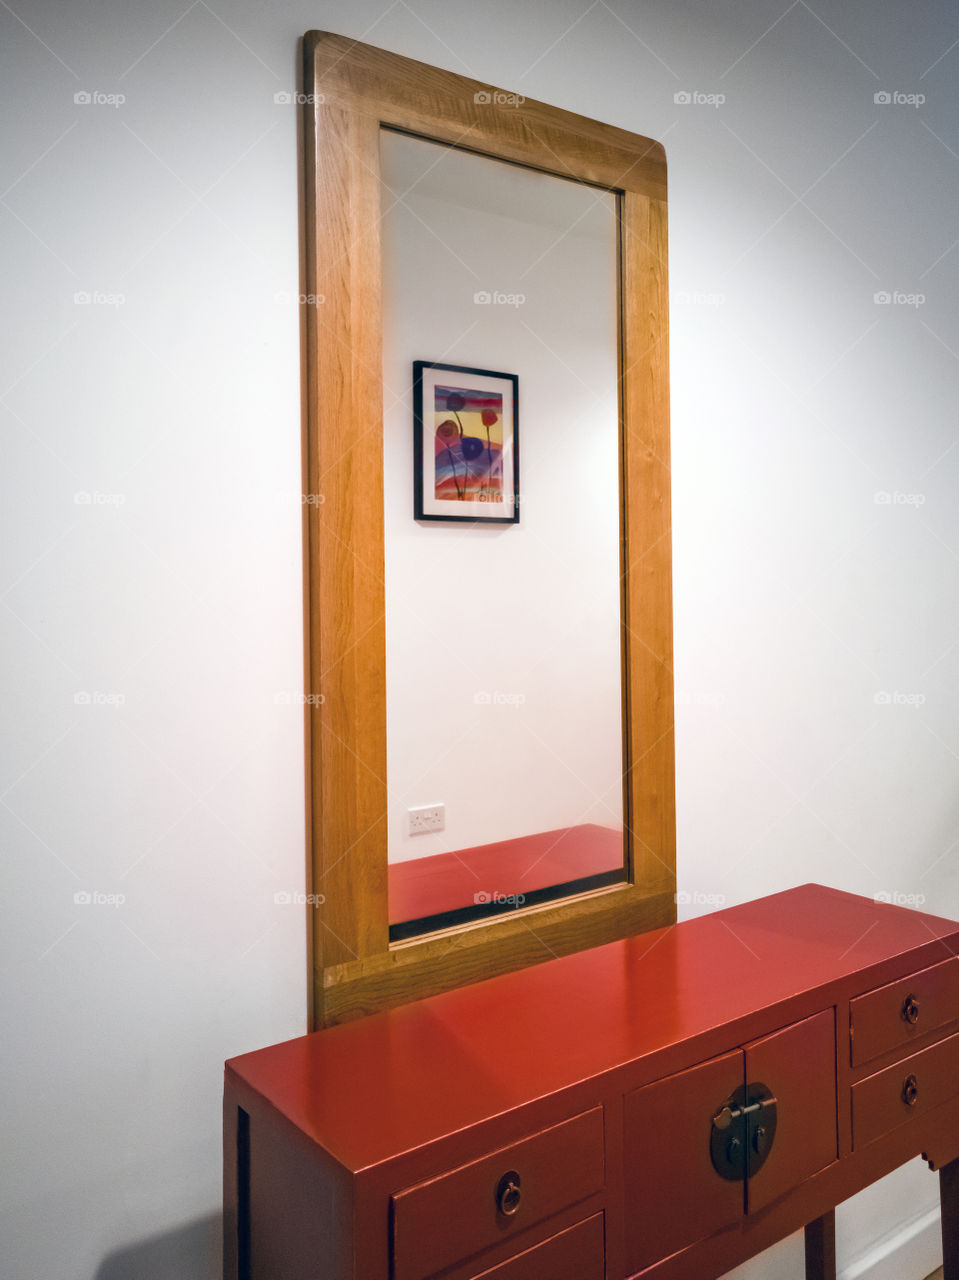 Rectangular wooden framed mirror reflects painting on the opposite wall.